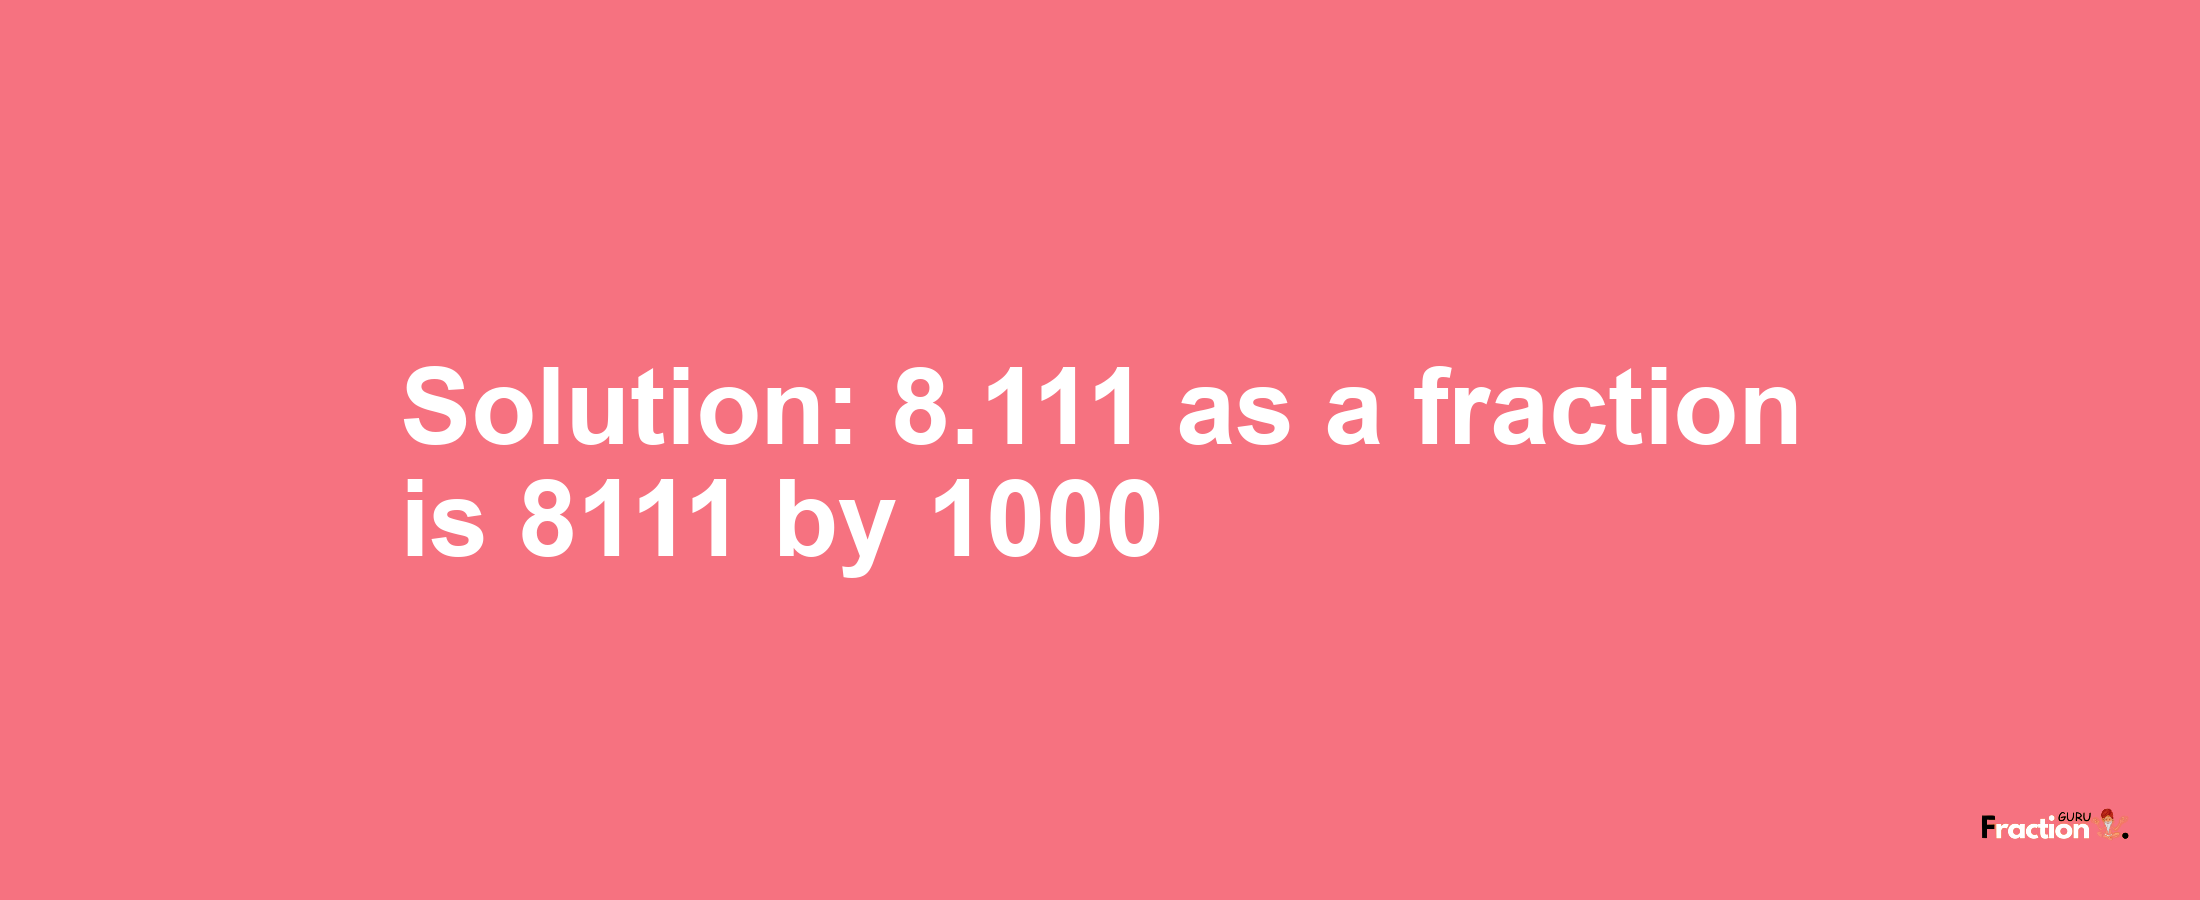 Solution:8.111 as a fraction is 8111/1000